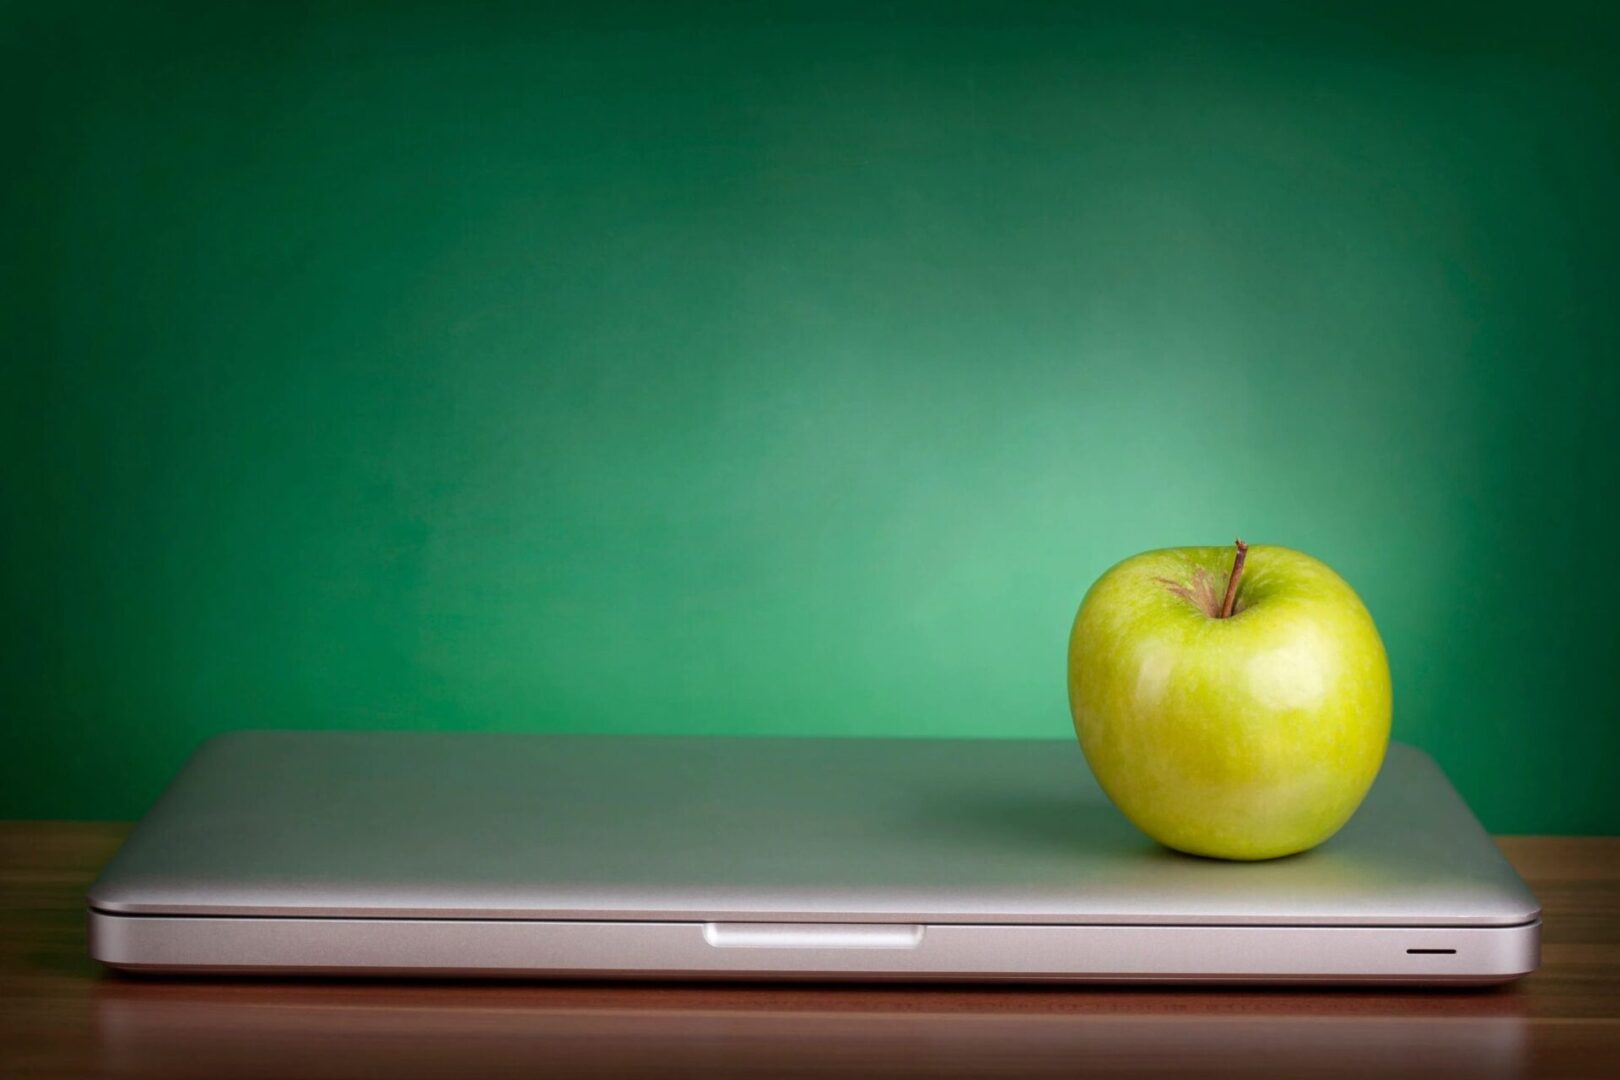 A green apple sitting on top of a laptop.